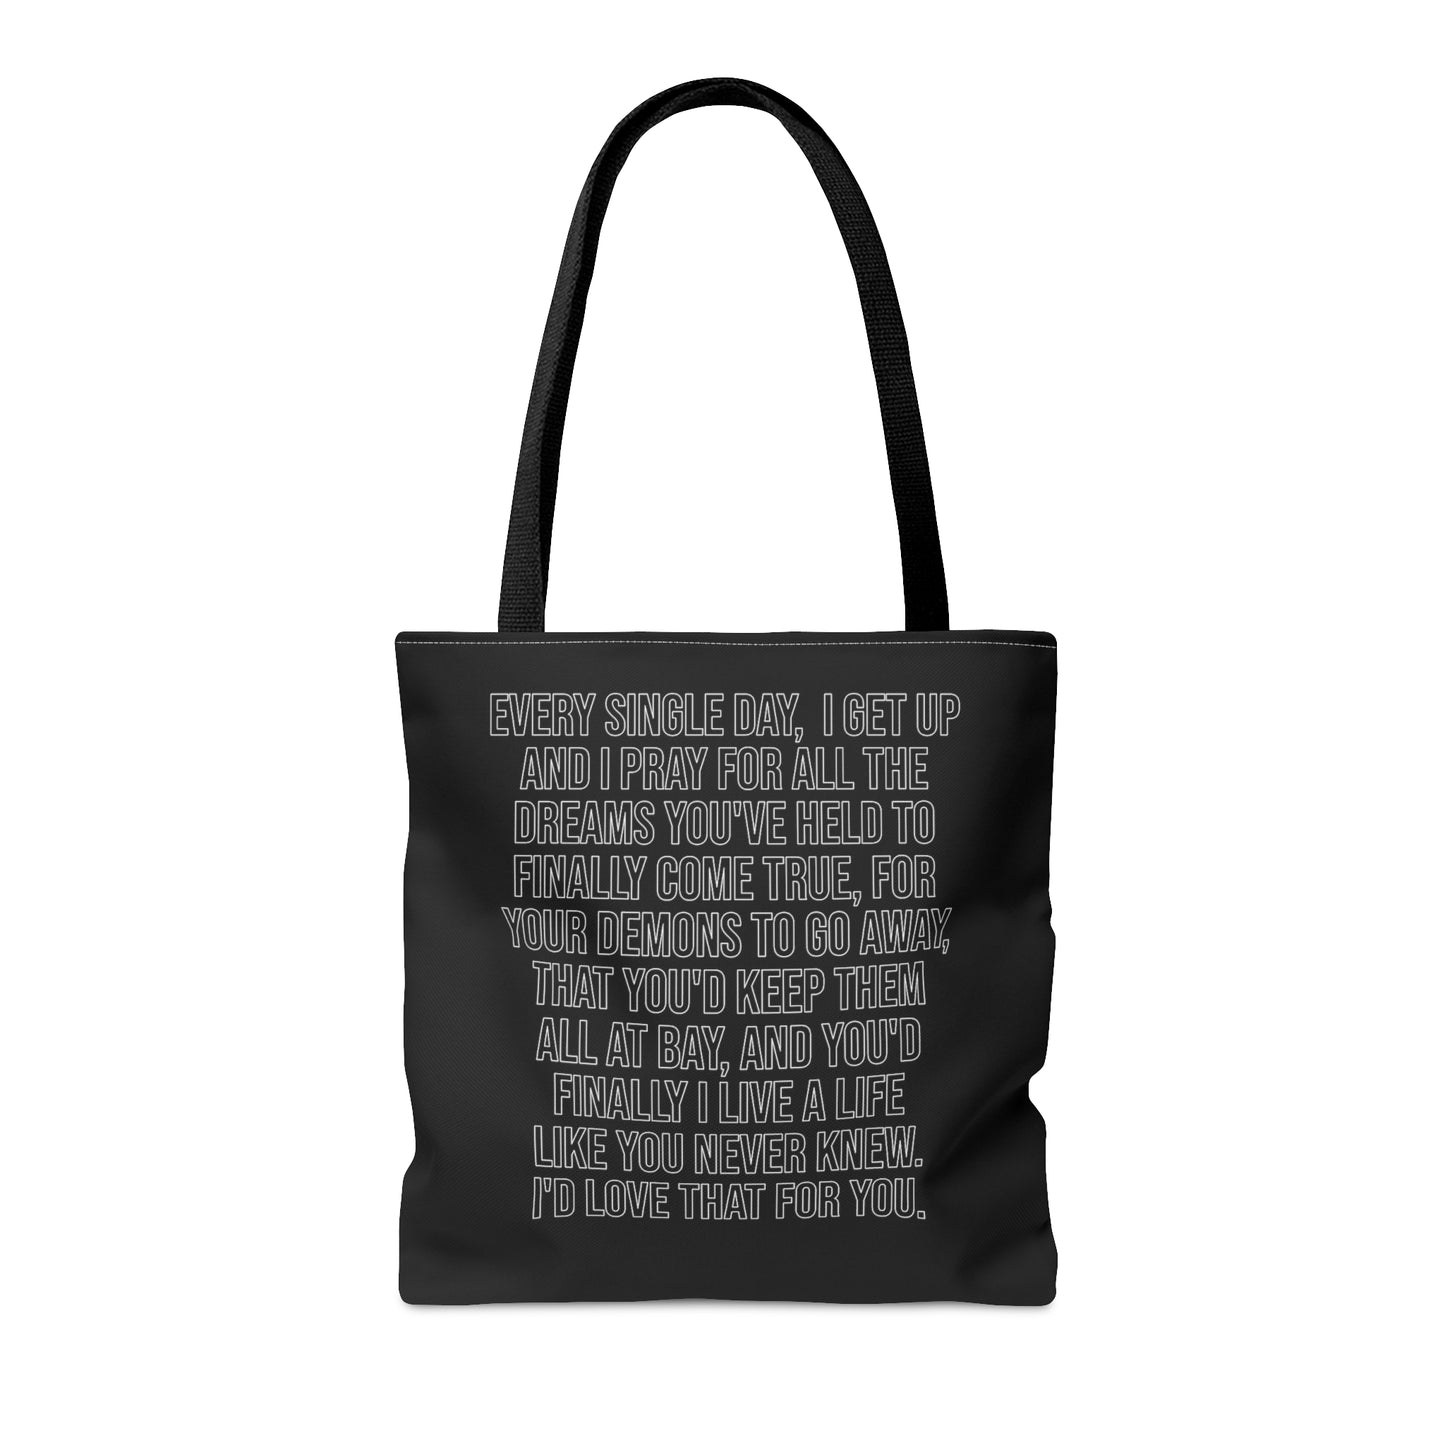 "I Love That For You" Tote Bag (AOP)